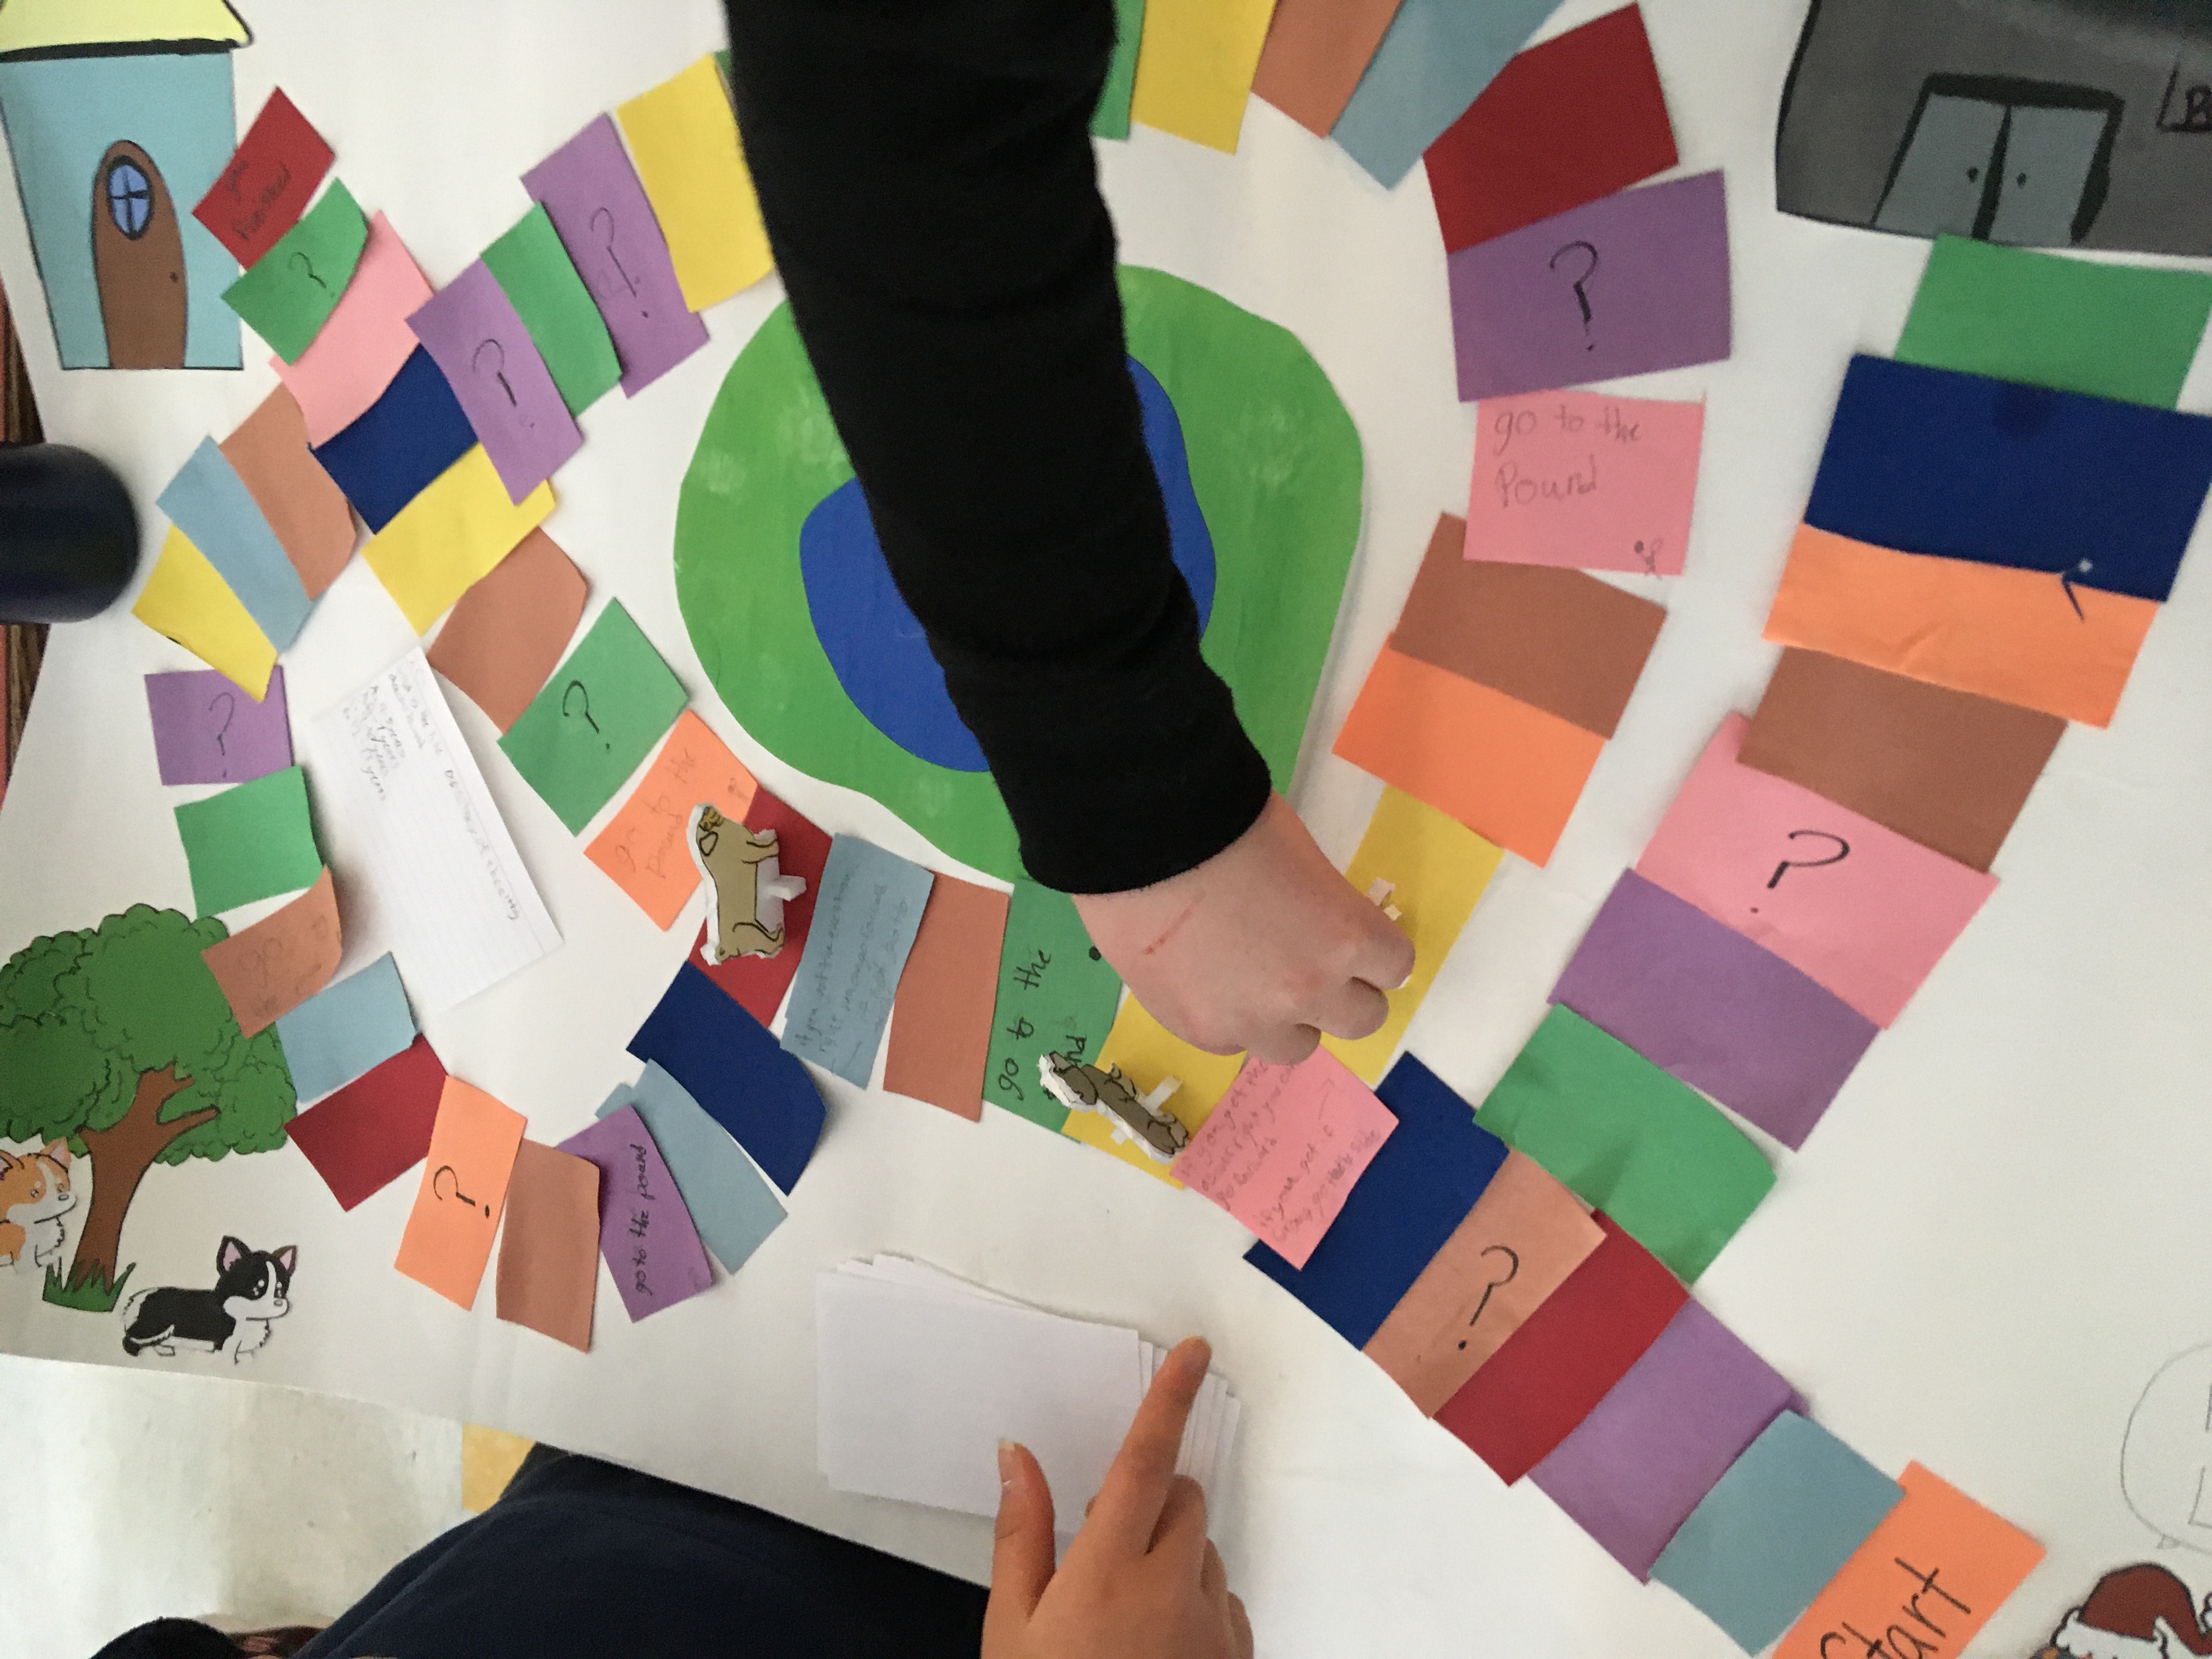 Student's hand shown as they play a colorful student made board game.